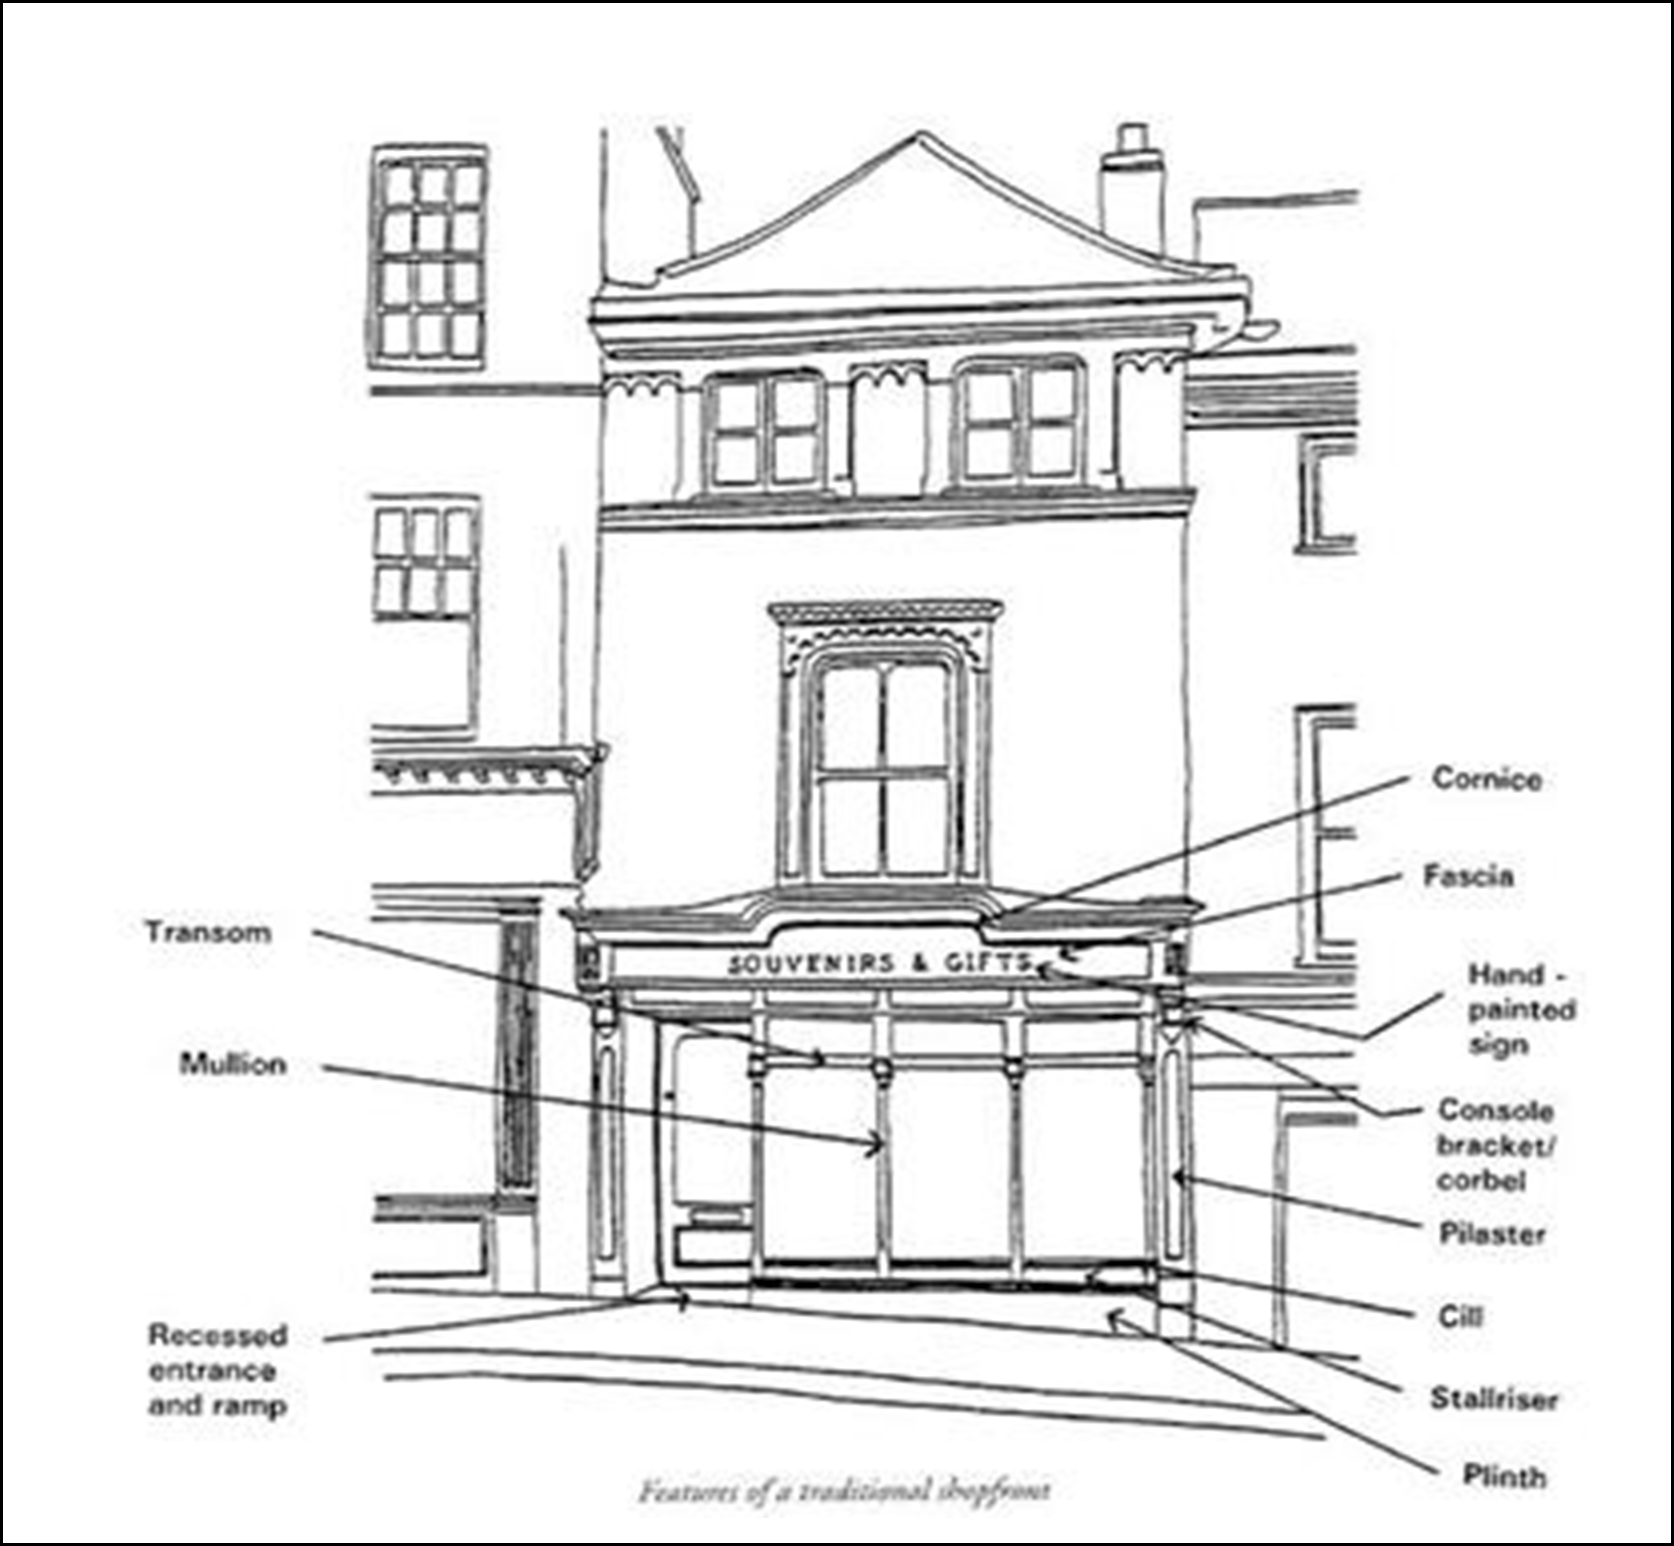 Line drawing of shop front